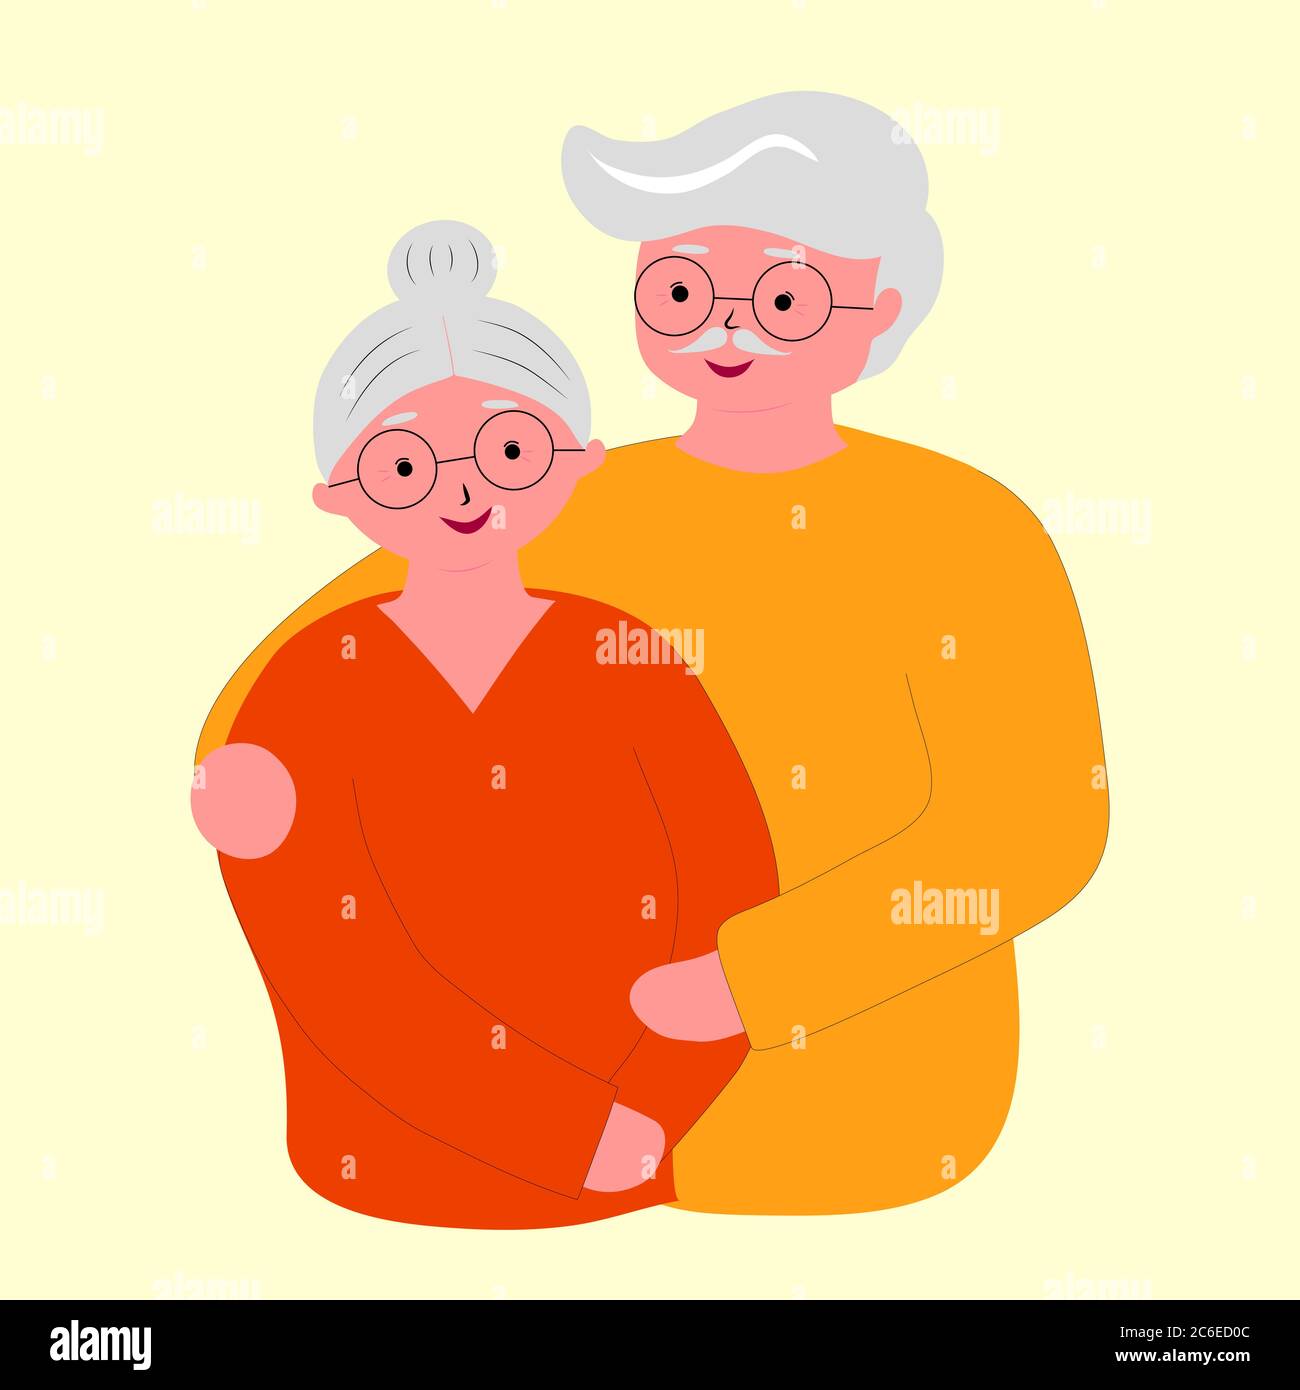 A happy elderly couple, senior citizen health plan, standing embraced together holding their hands. Medical insurance plan. Stock Vector